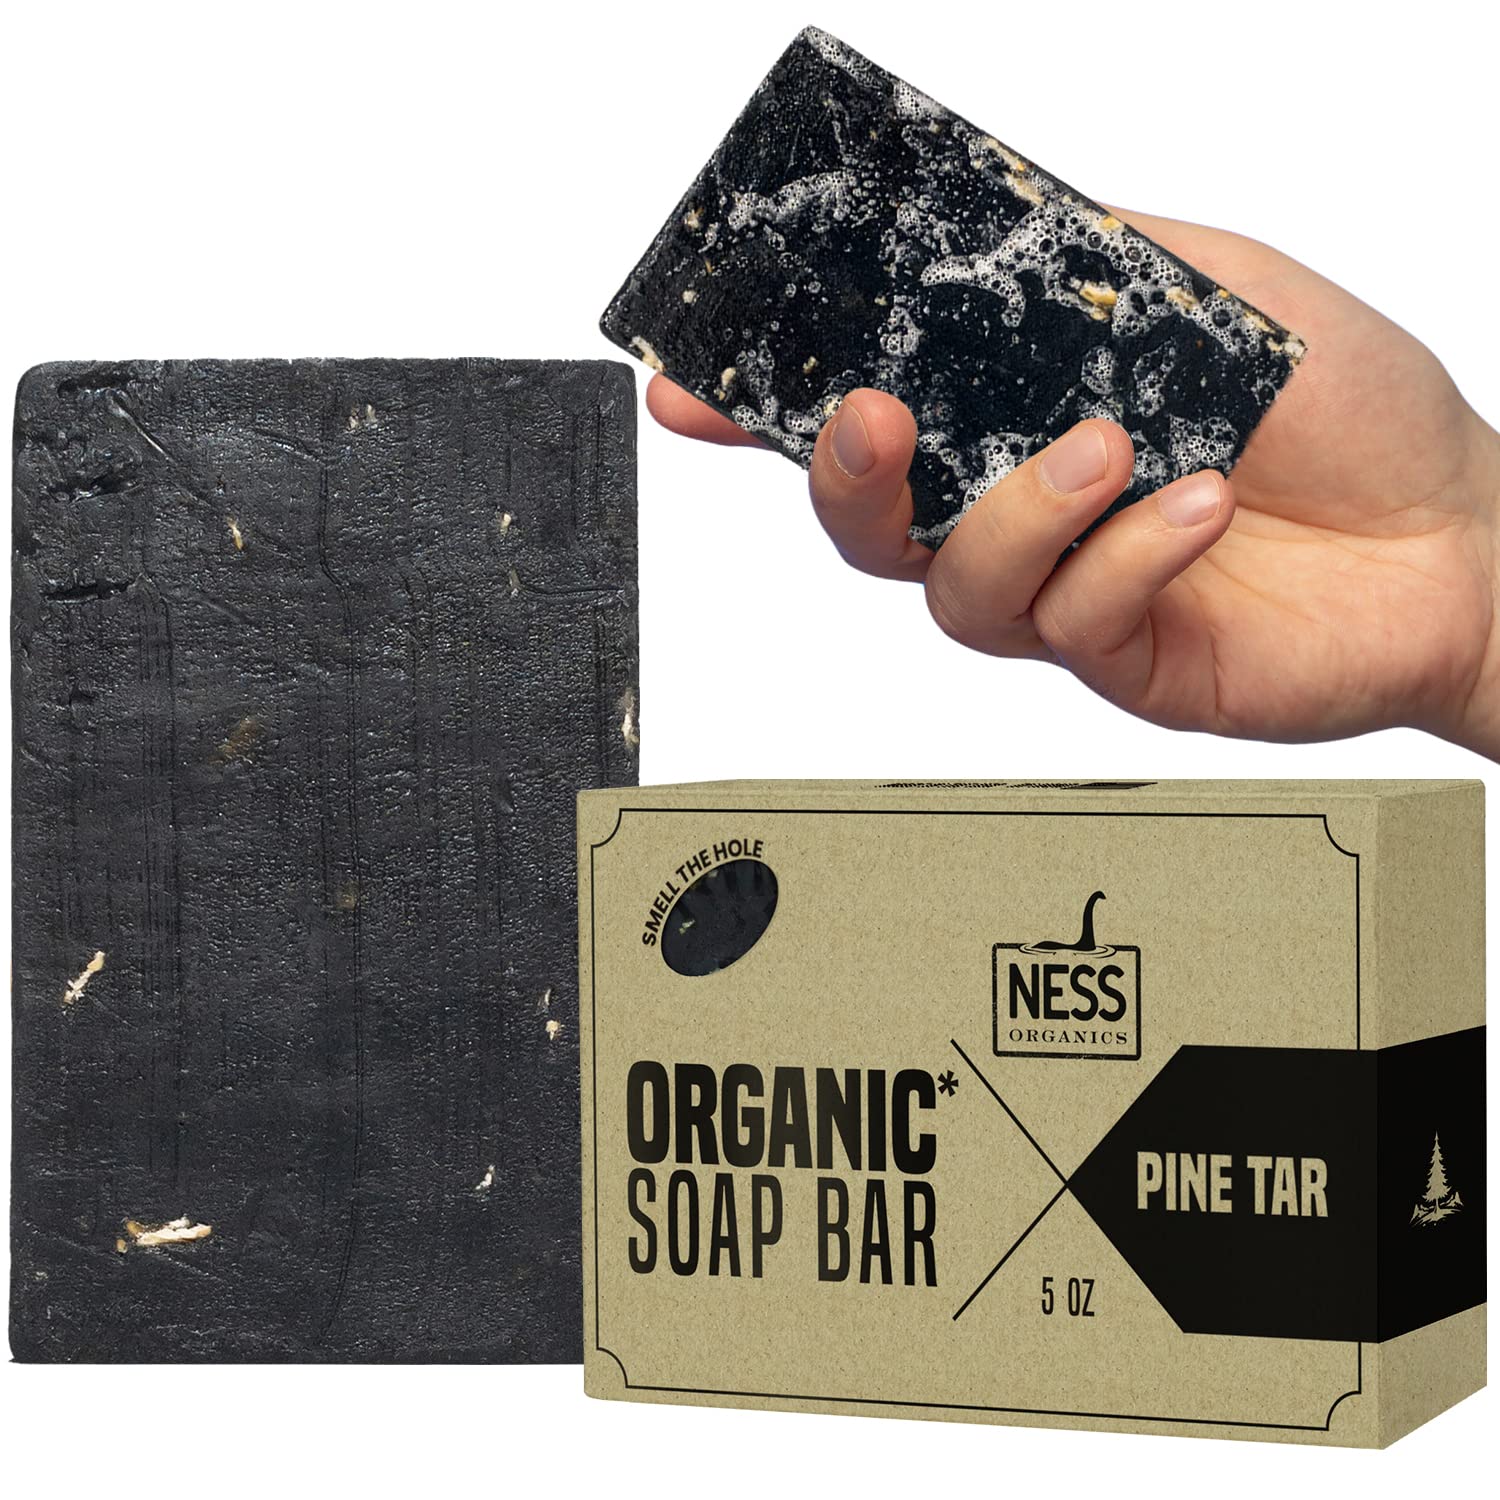 Ness Mens Soap Bar - Pine Tar Scent Natural Soap For Men With